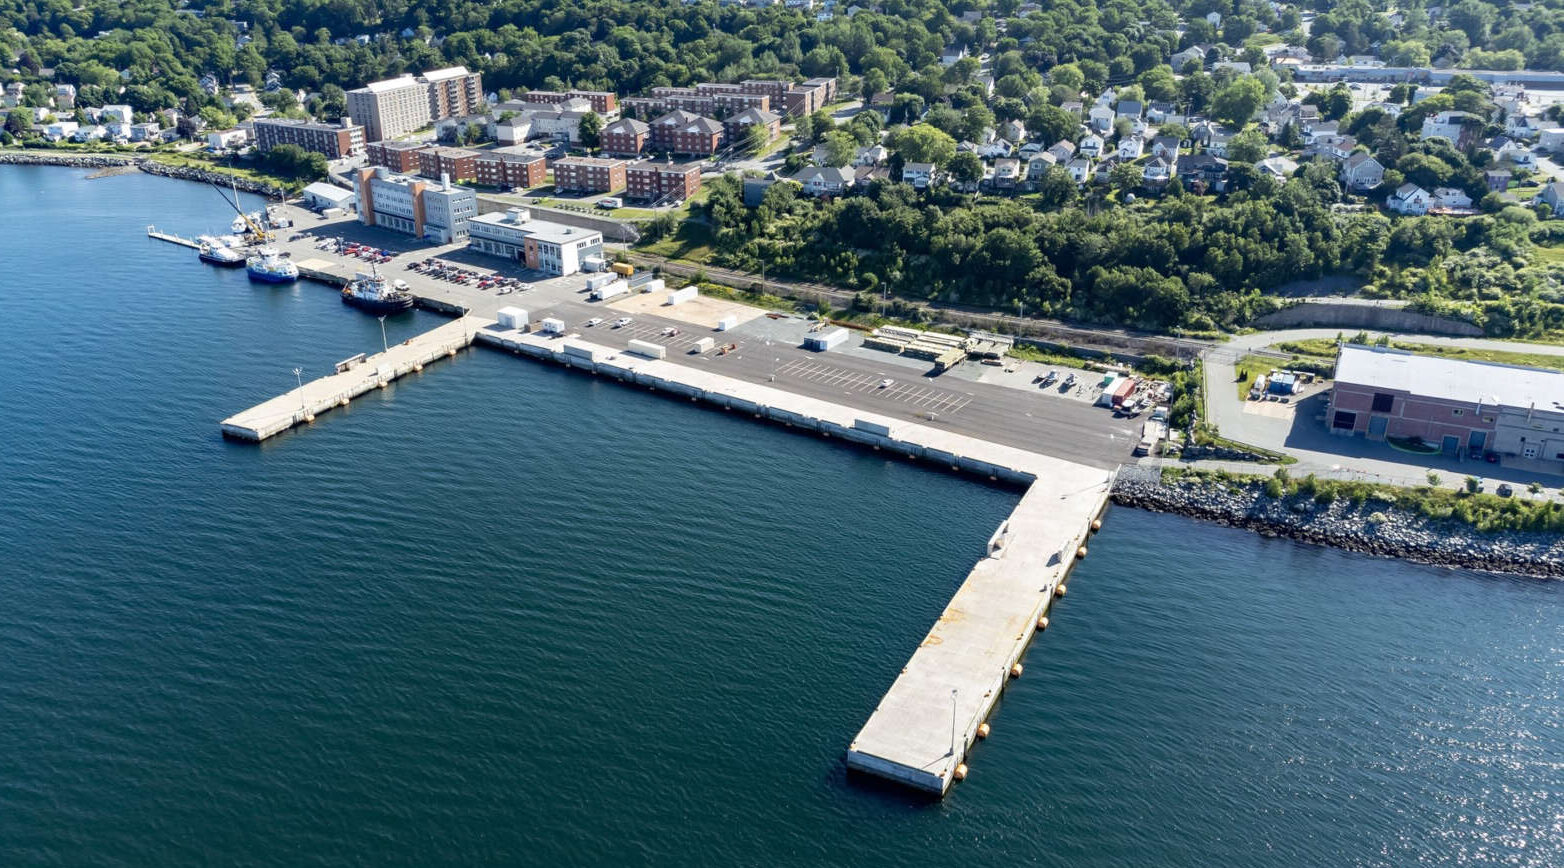 Aerial photo of waterfront building complex and wharfs leading out to harbour